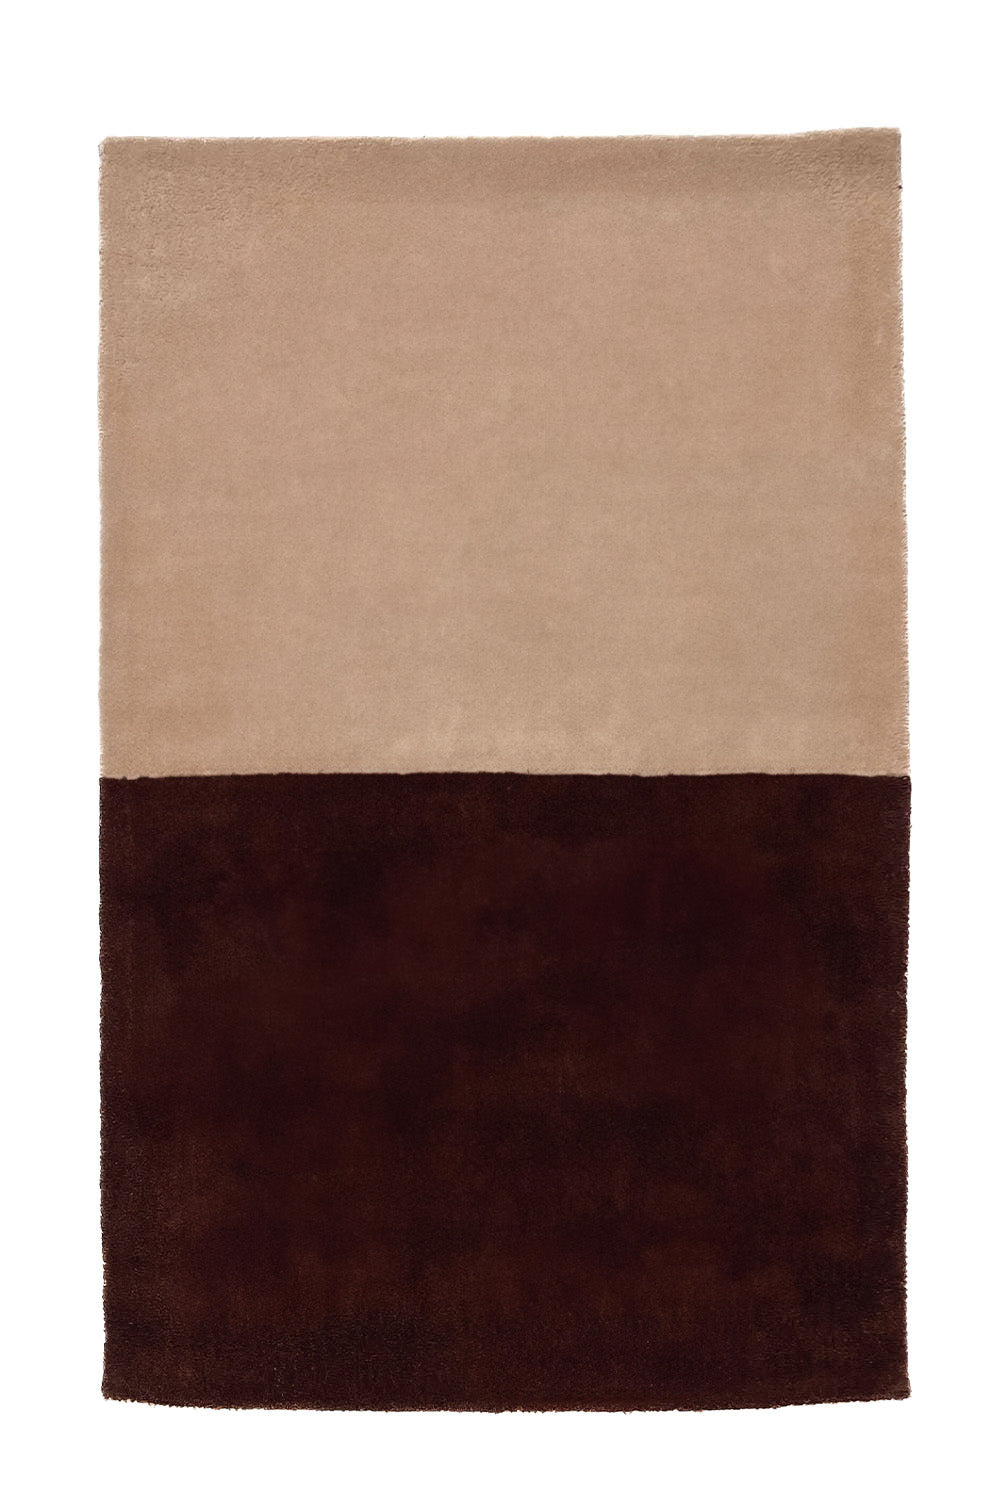 Classic Color Block Hand Tufted Wool Rug in Brown and Tanby Jubi